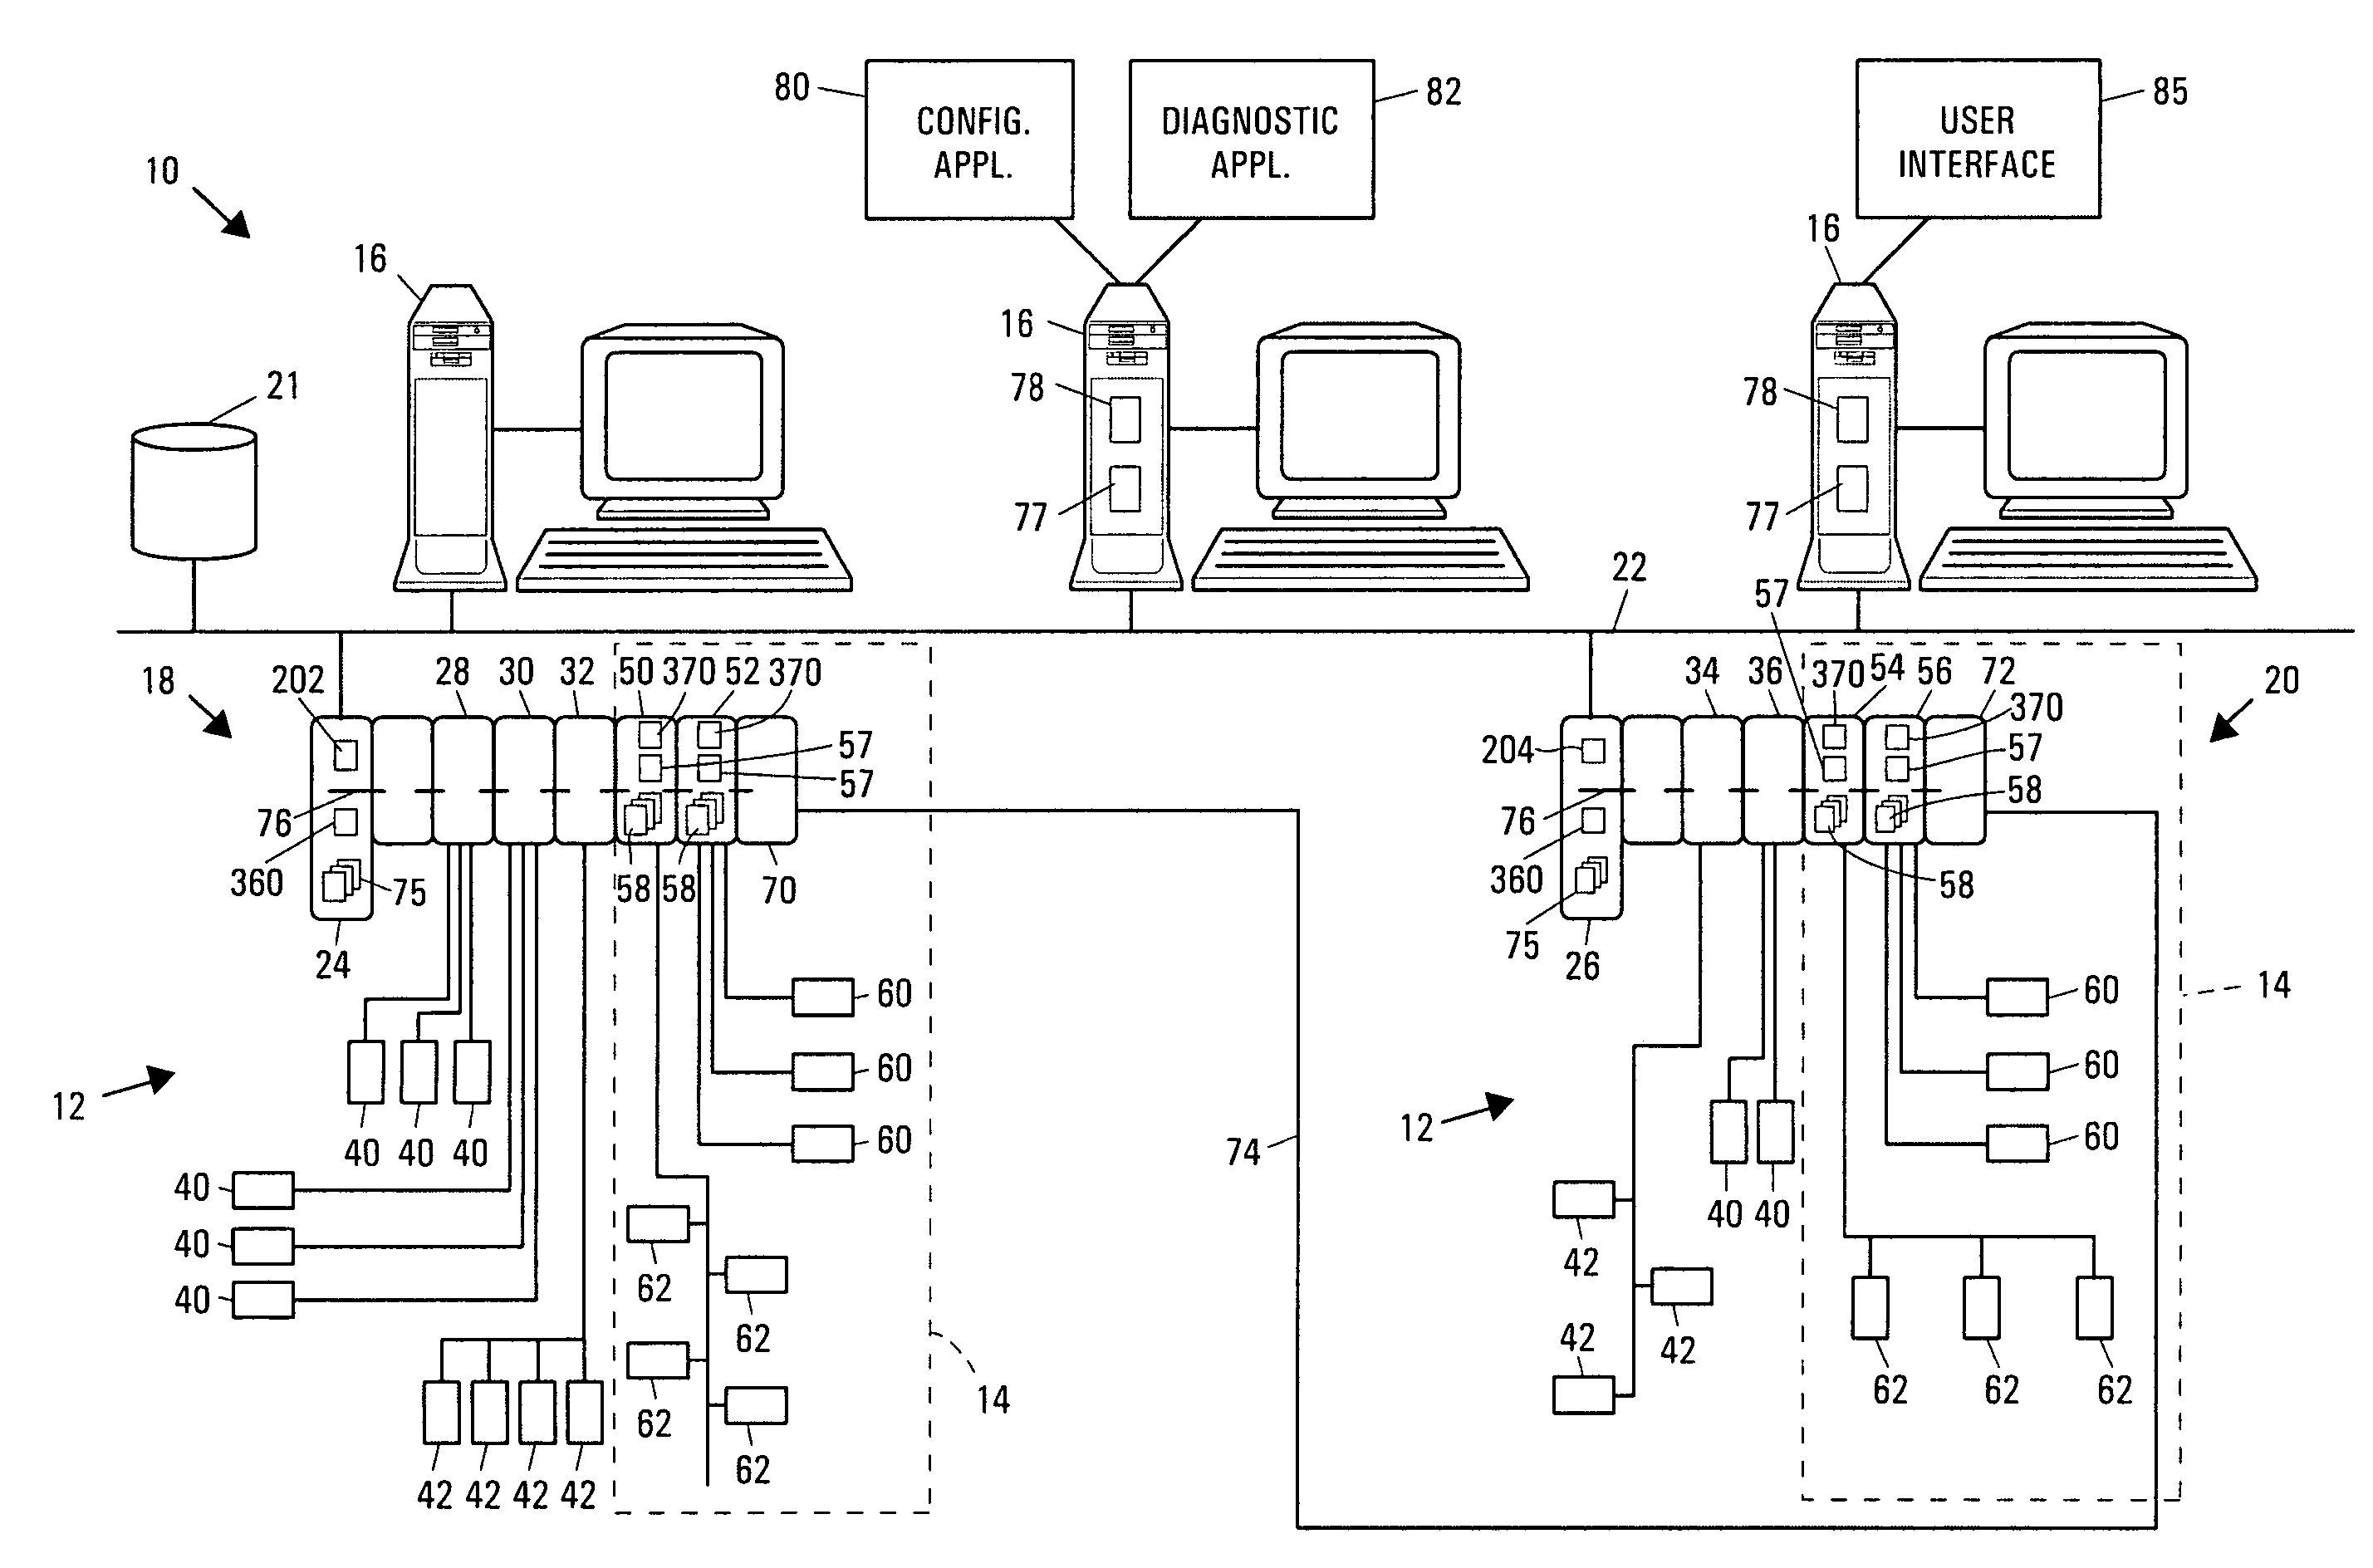 Integrated diagnostics in a process plant having a process control system and a safety system